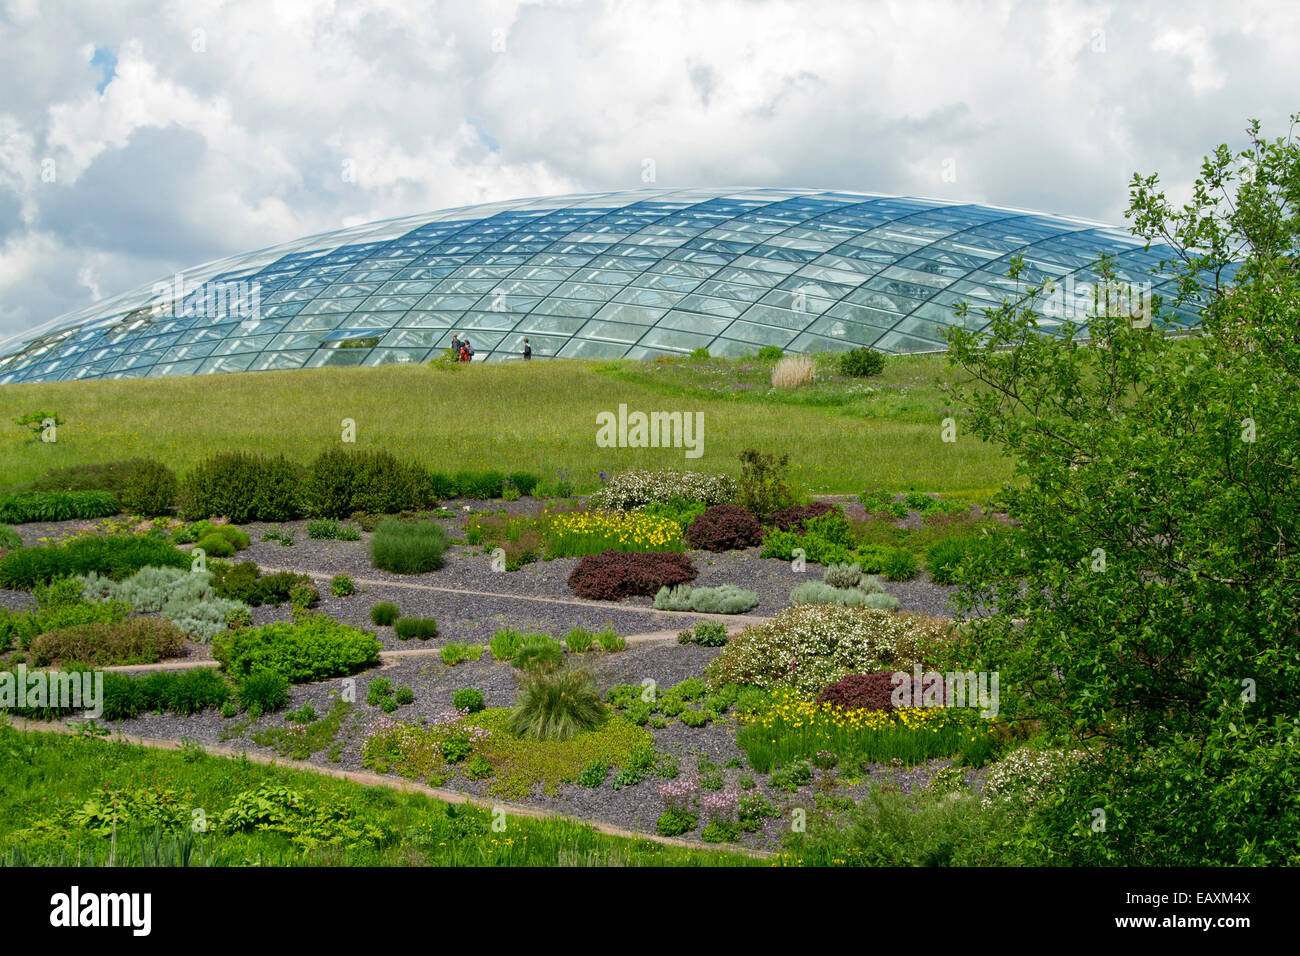 World's largest greenhouse, conservatory at National Botanic Gardens of Wales, dwarfing people in adjacent meadow and gardens Stock Photo